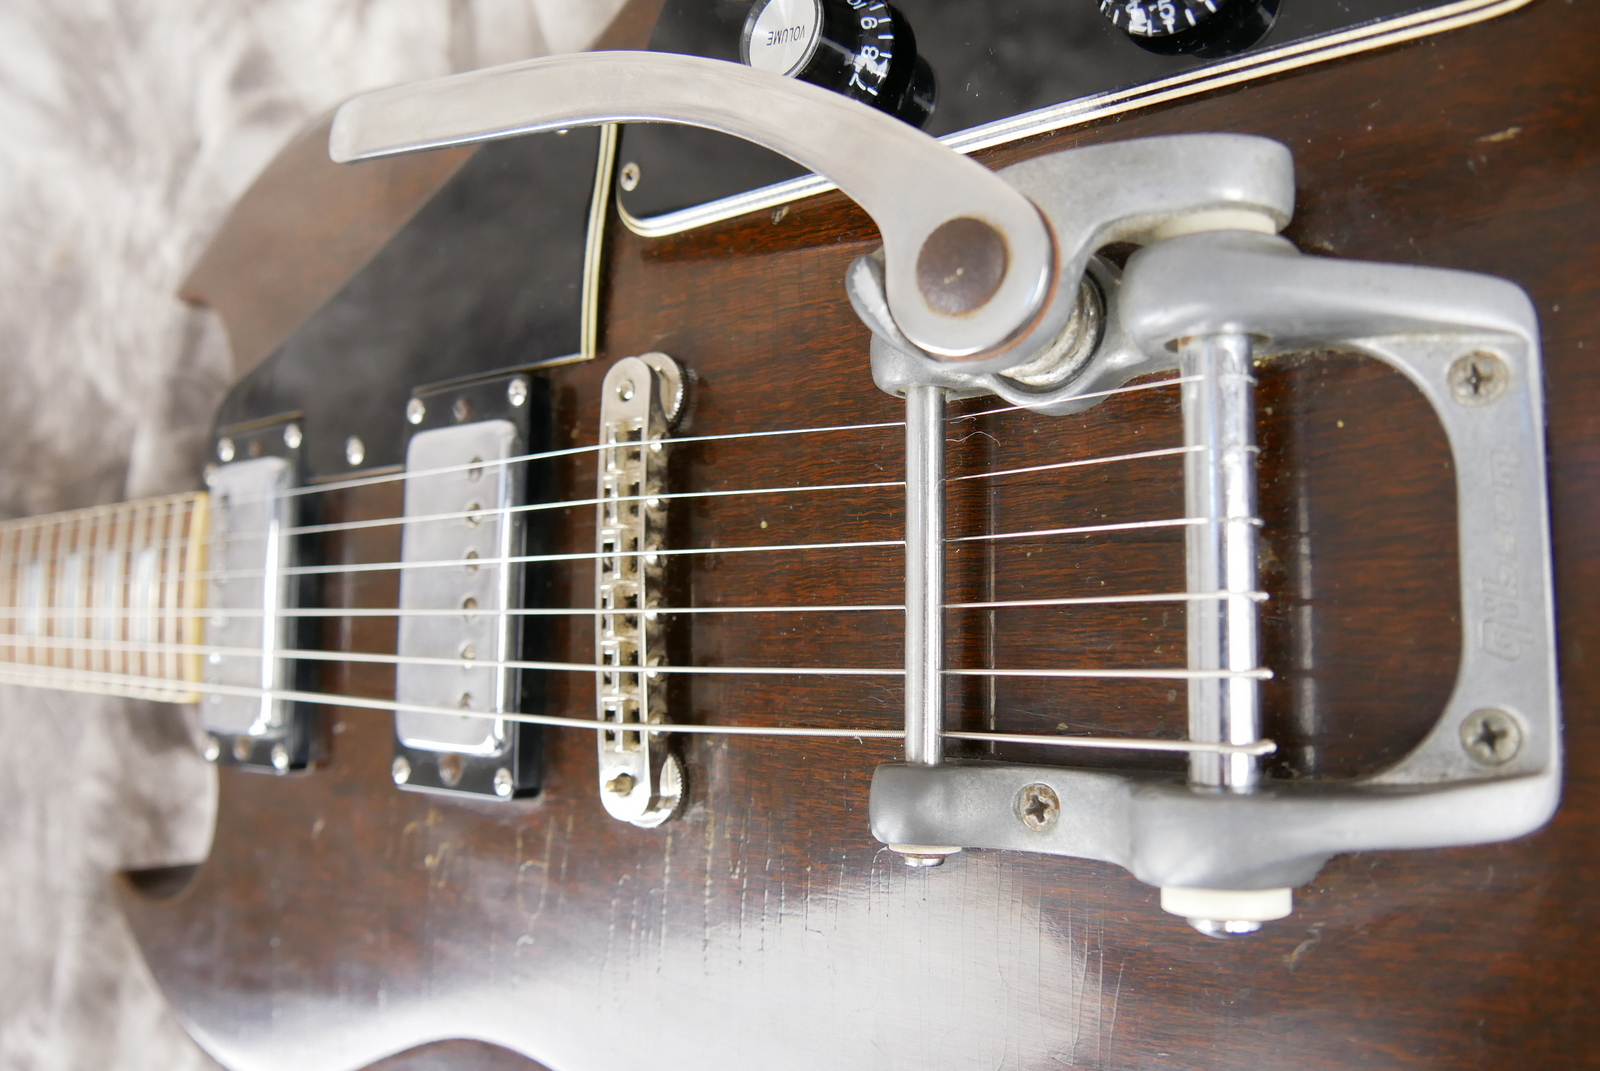 Gibson_SG_Deluxe_bigsby_1971_1972_walnut_cts-pots_1966-016.JPG